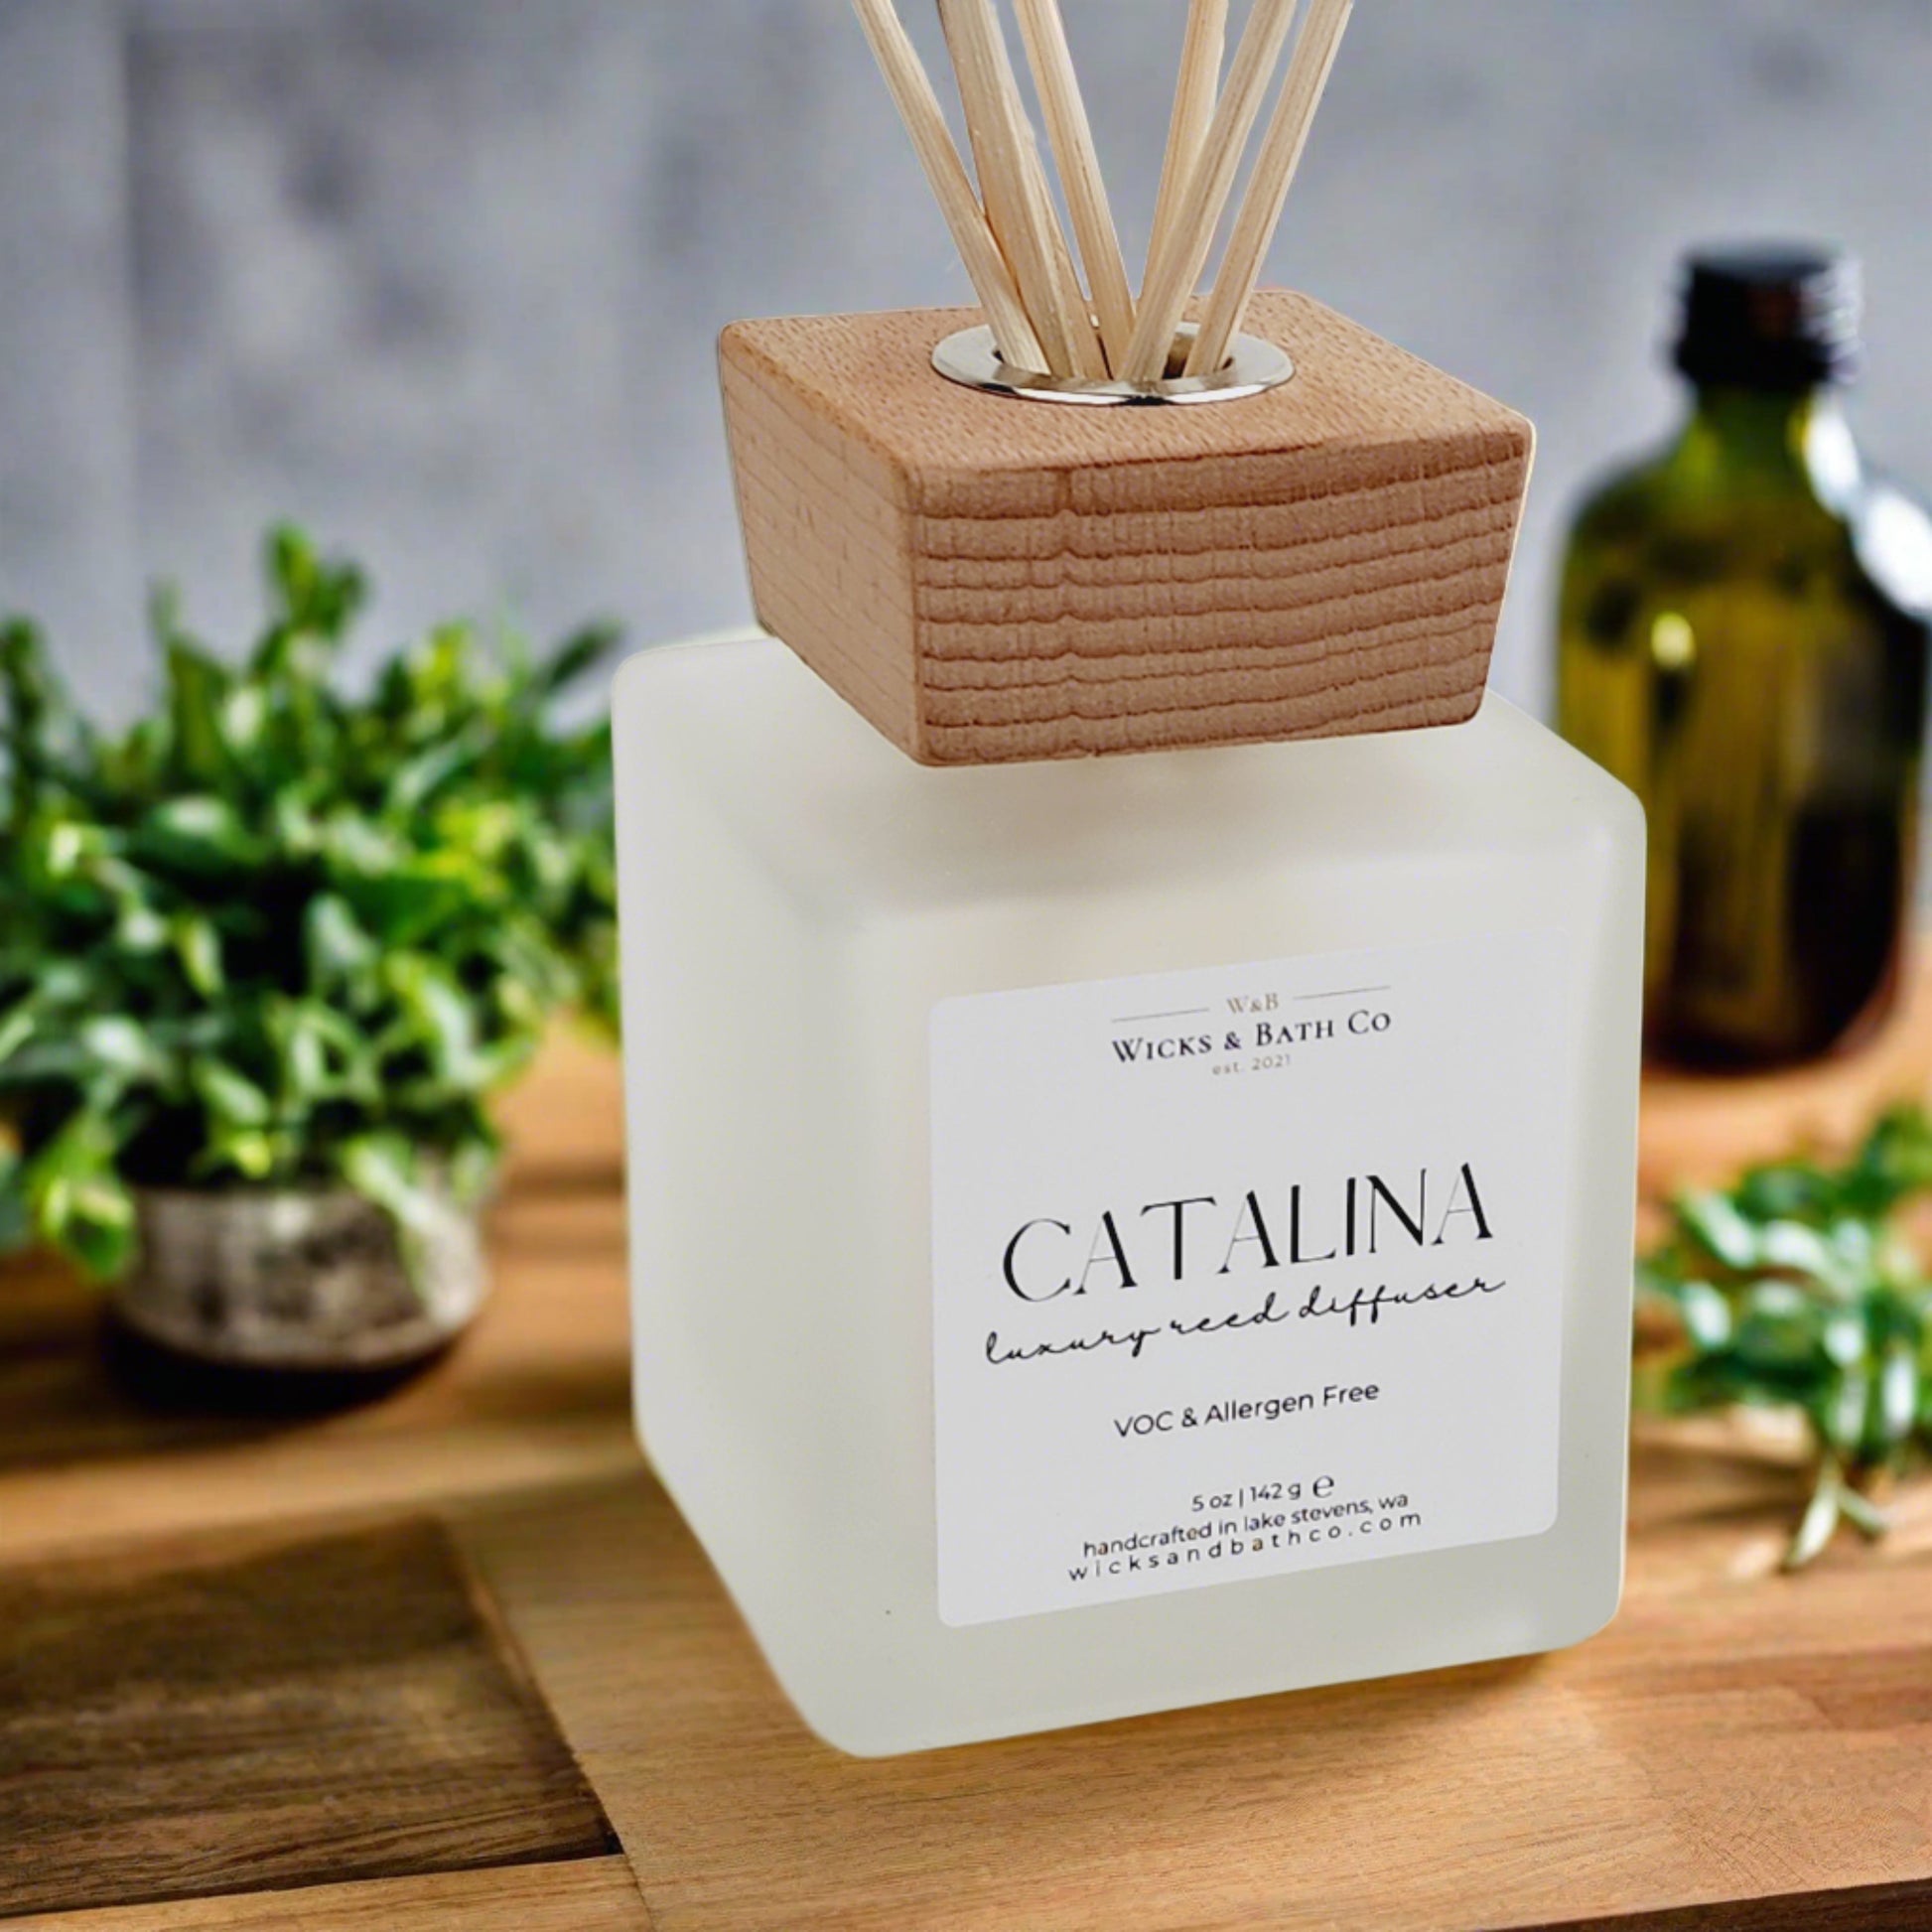 CATALINA (REED DIFFUSER) - Wicks and Bath Co.